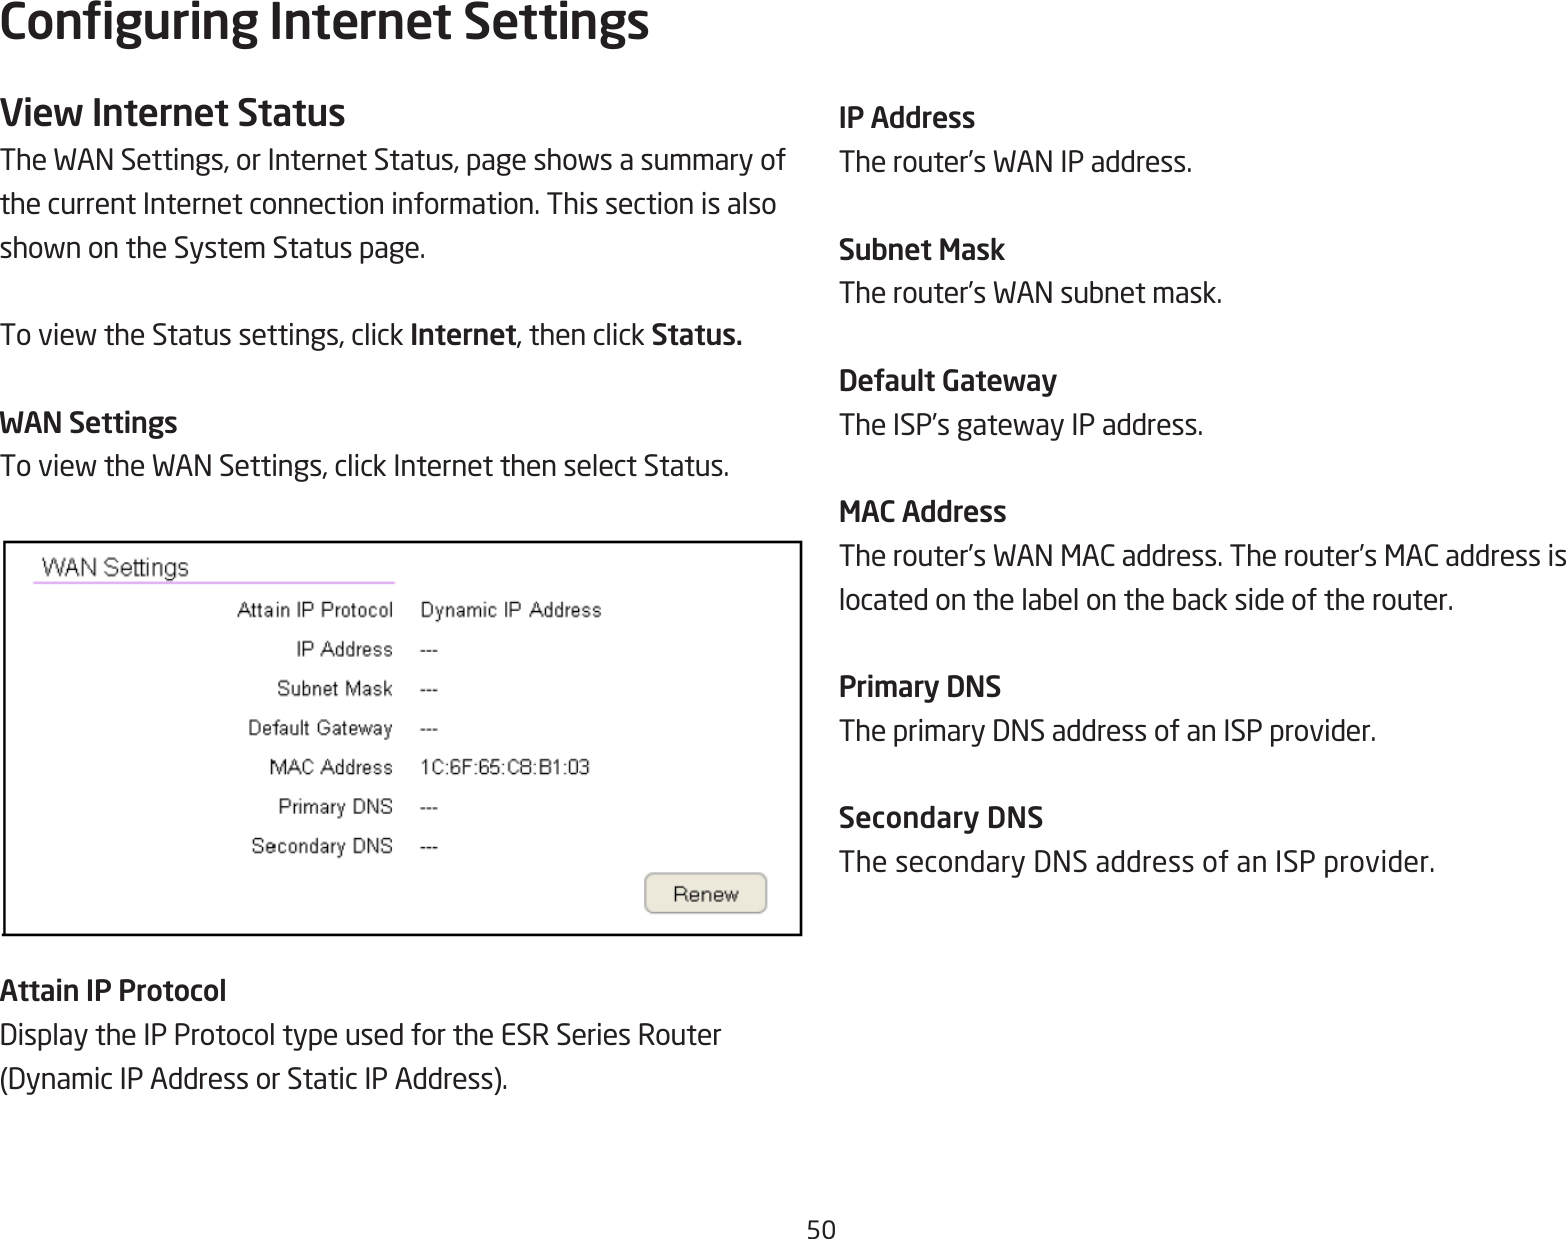 50Conguring Internet SettingsView Internet StatusTheWANSettings,orInternetStatus,pageshowsasummaryofthe current Internet connection information. This section is alsoshownontheSystemStatuspage.ToviewtheStatussettings,clickInternet, then click Status.WAN SettingsToviewtheWANSettings,clickInternetthenselectStatus.Attain IP ProtocolDisplaytheIPProtocoltypeusedfortheESRSeriesRouter(DynamicIPAddressorStaticIPAddress).IP AddressTherouter’sWANIPaddress.Subnet MaskTherouter’sWANsubnetmask.Default GatewayTheISP’sgatewayIPaddress.MAC AddressTherouter’sWANMACaddress.Therouter’sMACaddressislocatedonthelabelonthebacksideoftherouter.Primary DNSTheprimaryDNSaddressofanISPprovider.Secondary DNSThesecondaryDNSaddressofanISPprovider.